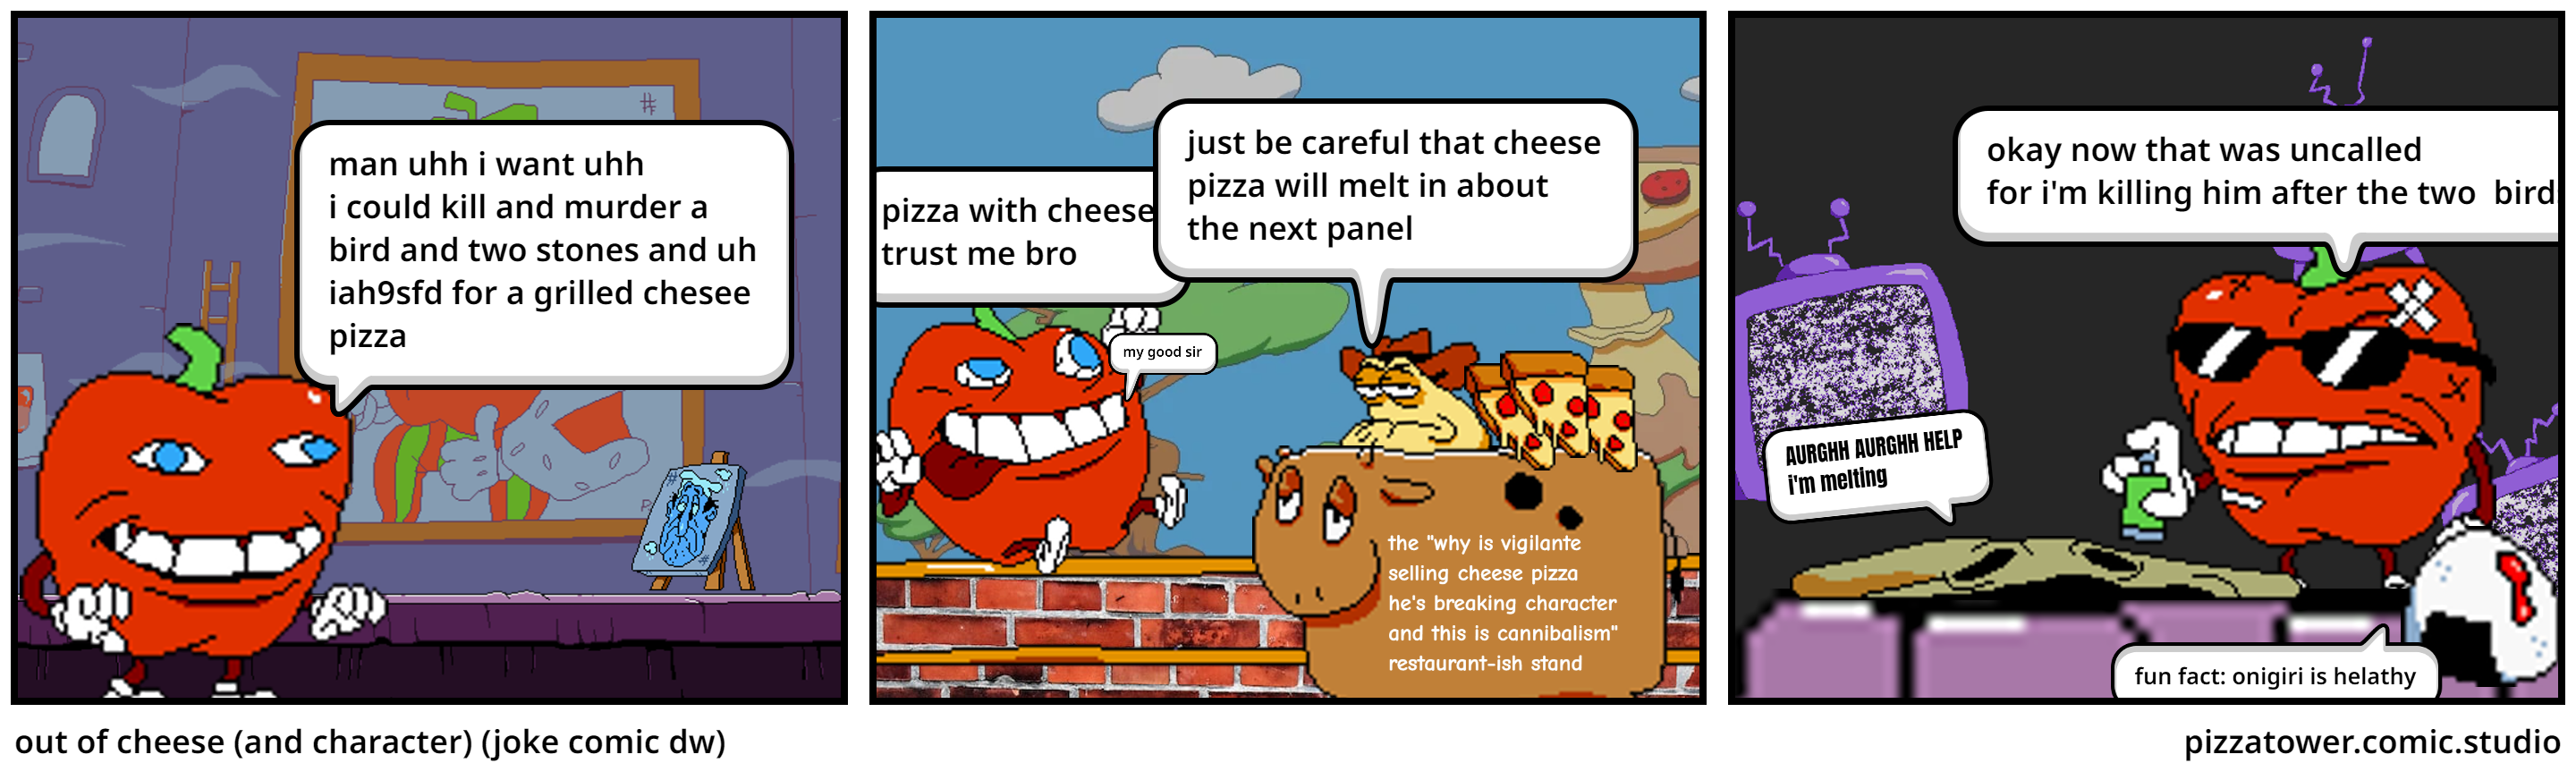 out of cheese (and character) (joke comic dw)